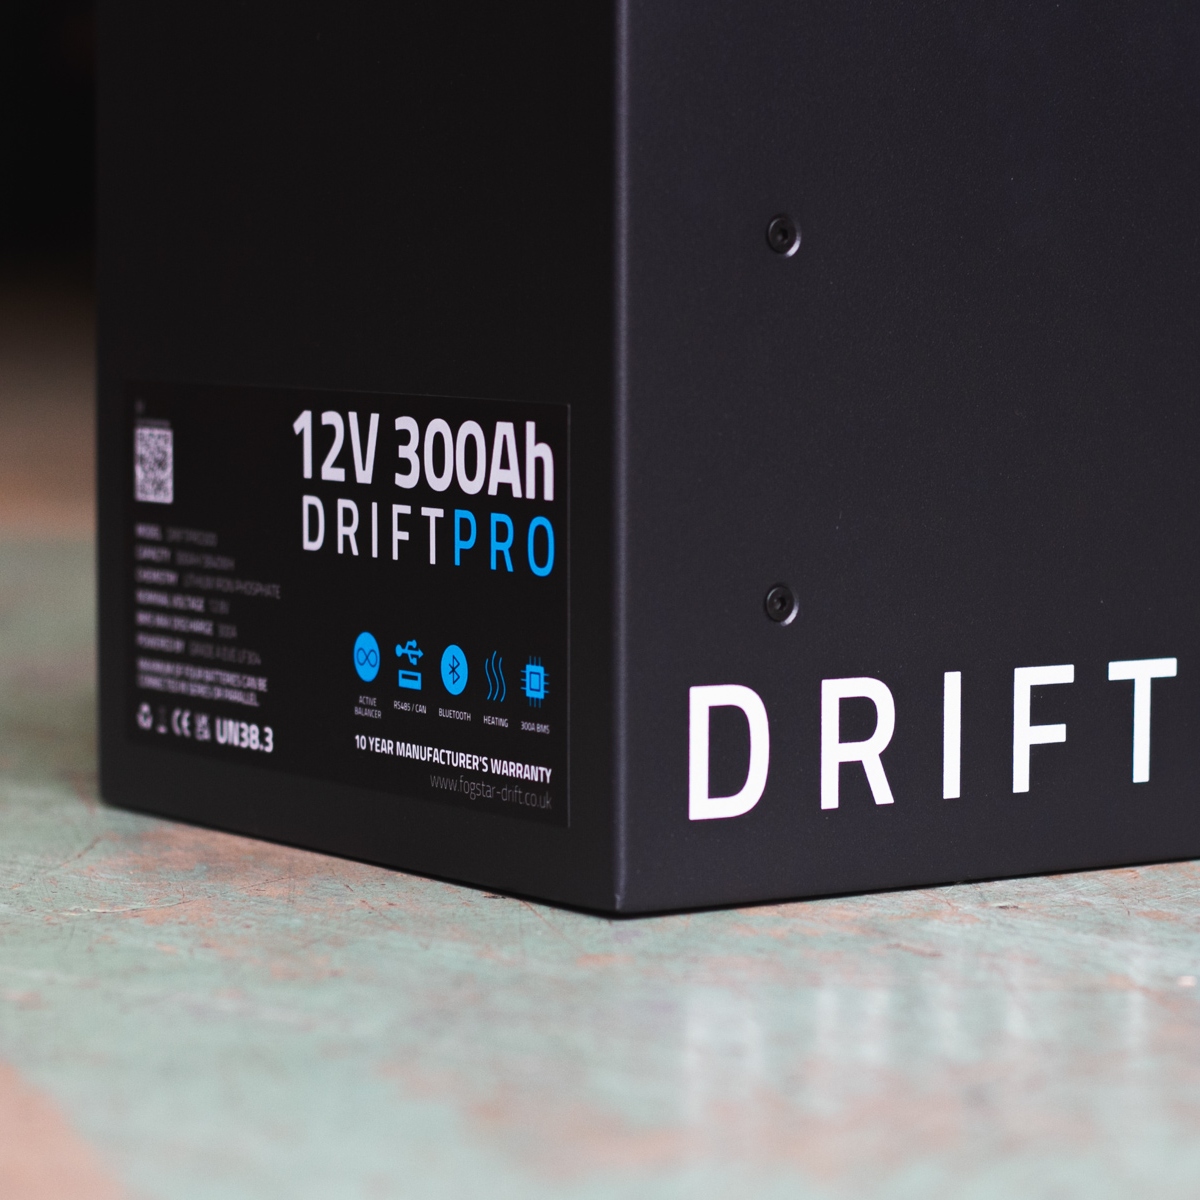 Close-up of a black Fogstar Drift PRO 300Ah - 12V lithium leisure battery, showcasing the brand name, specifications, and warranty label.